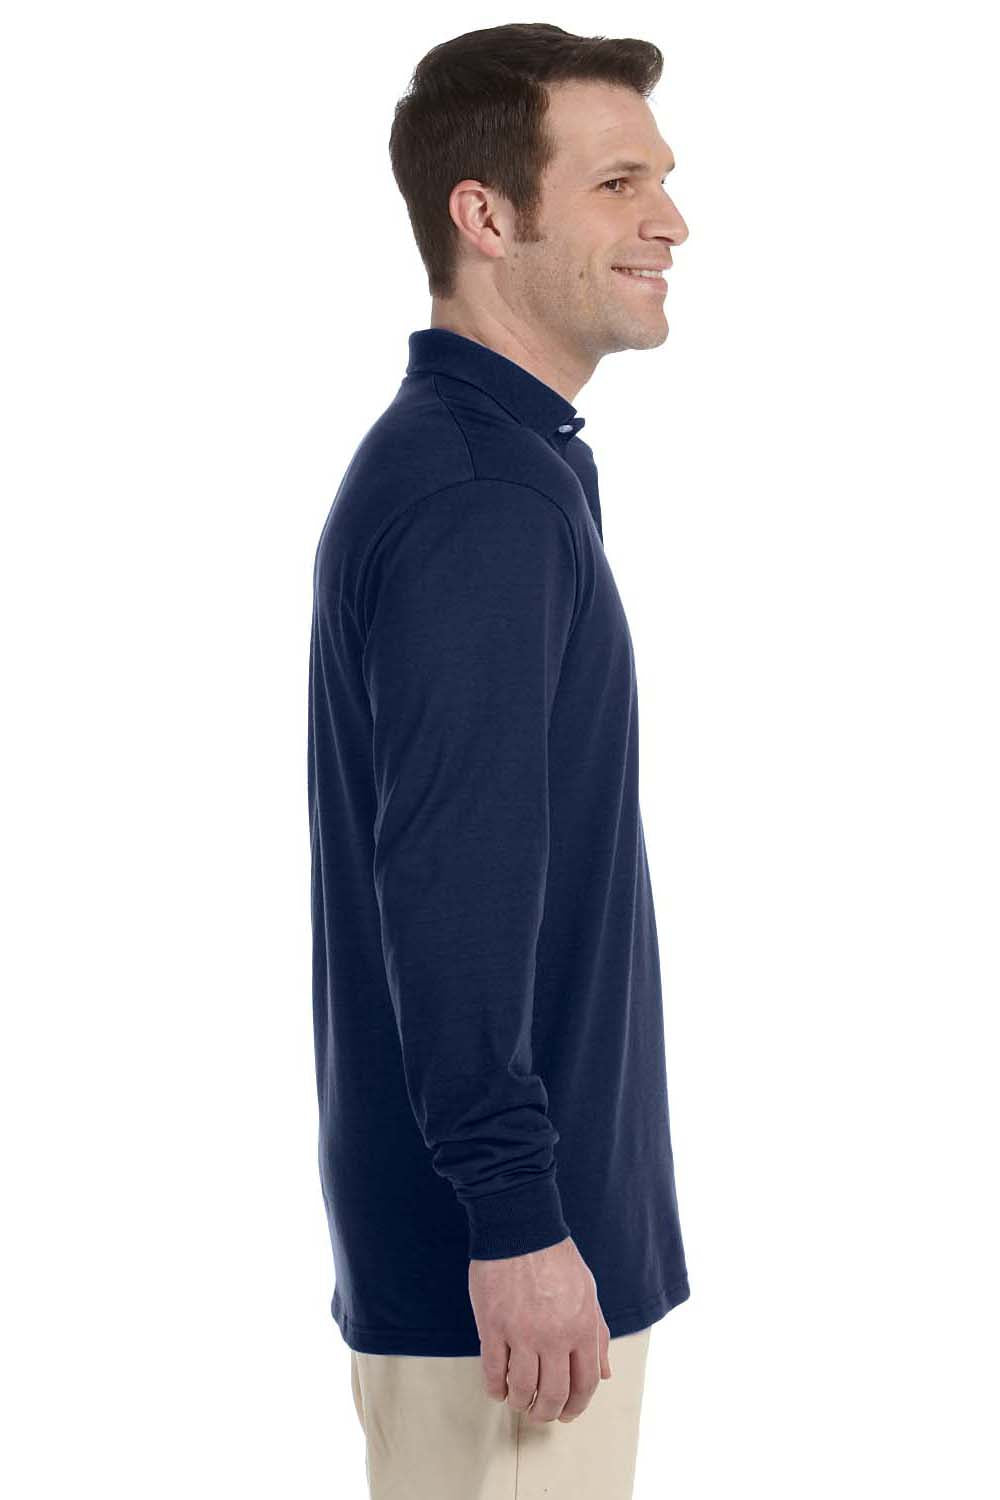 Jerzees 437ML Mens SpotShield Stain Resistant Long Sleeve Polo Shirt Navy Blue Side